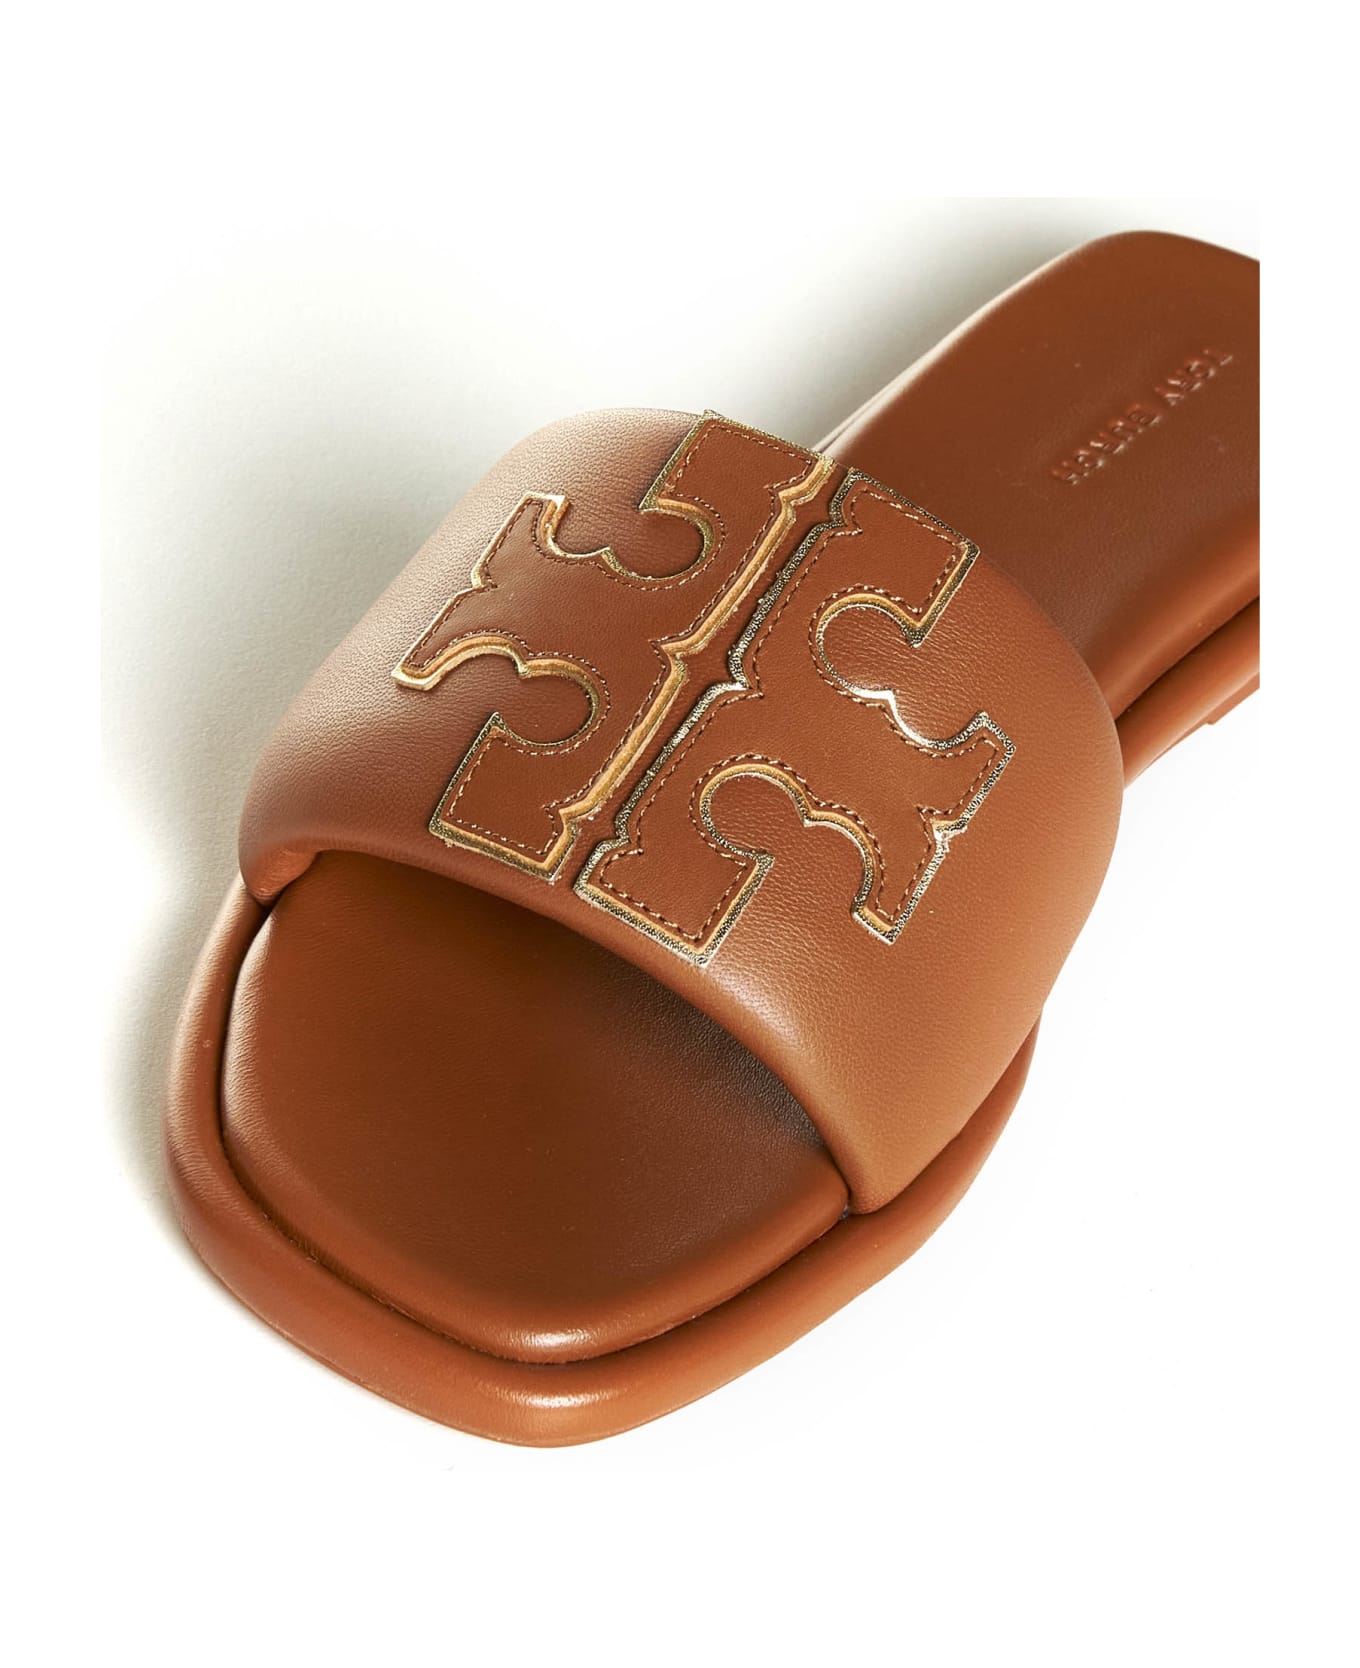 Tory Burch Double T Leather Slides - Brown